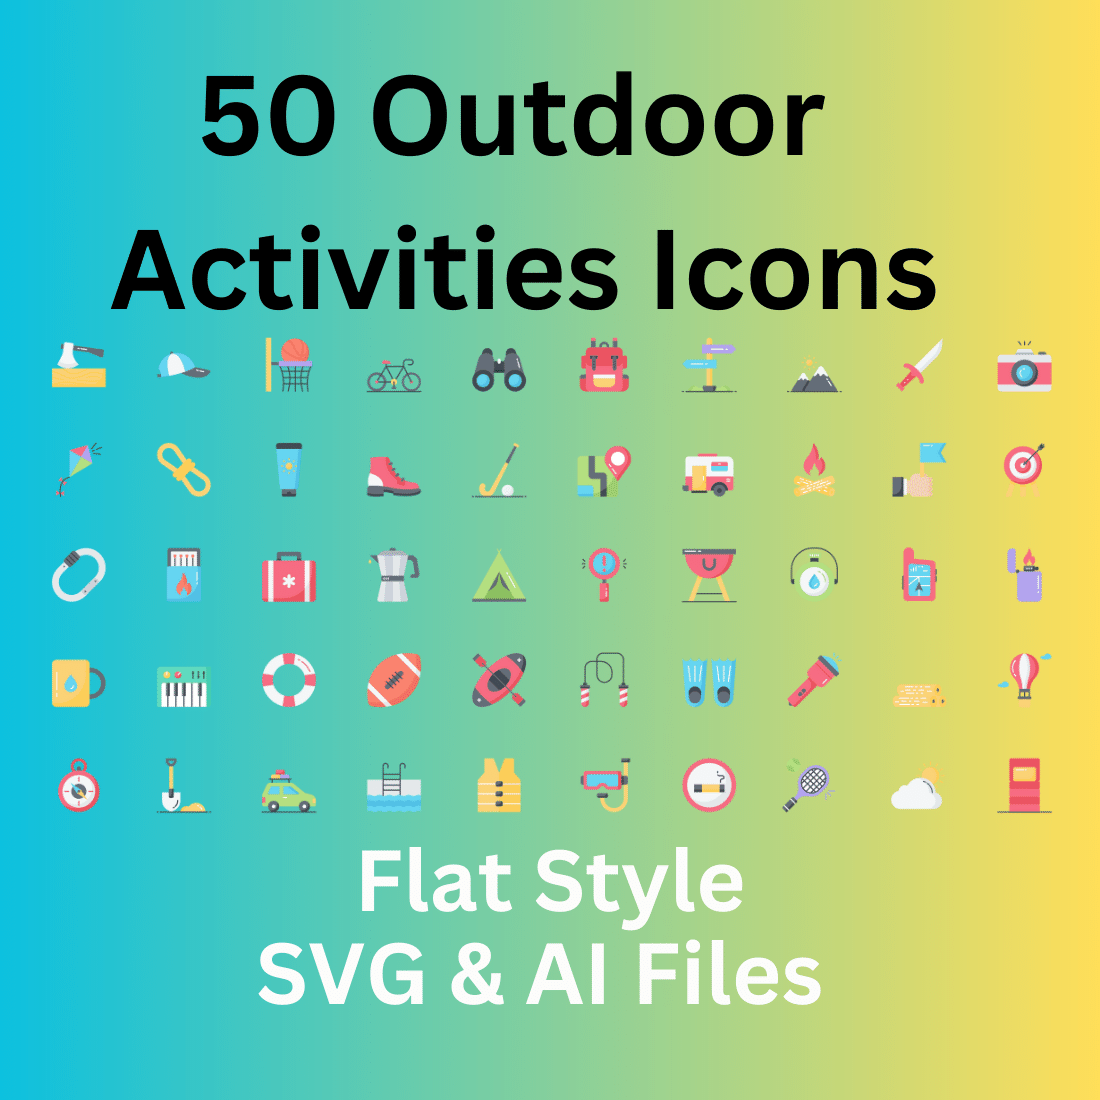 Outdoor Activities Icon Set 50 Flat Icons - SVG And AI Files cover image.